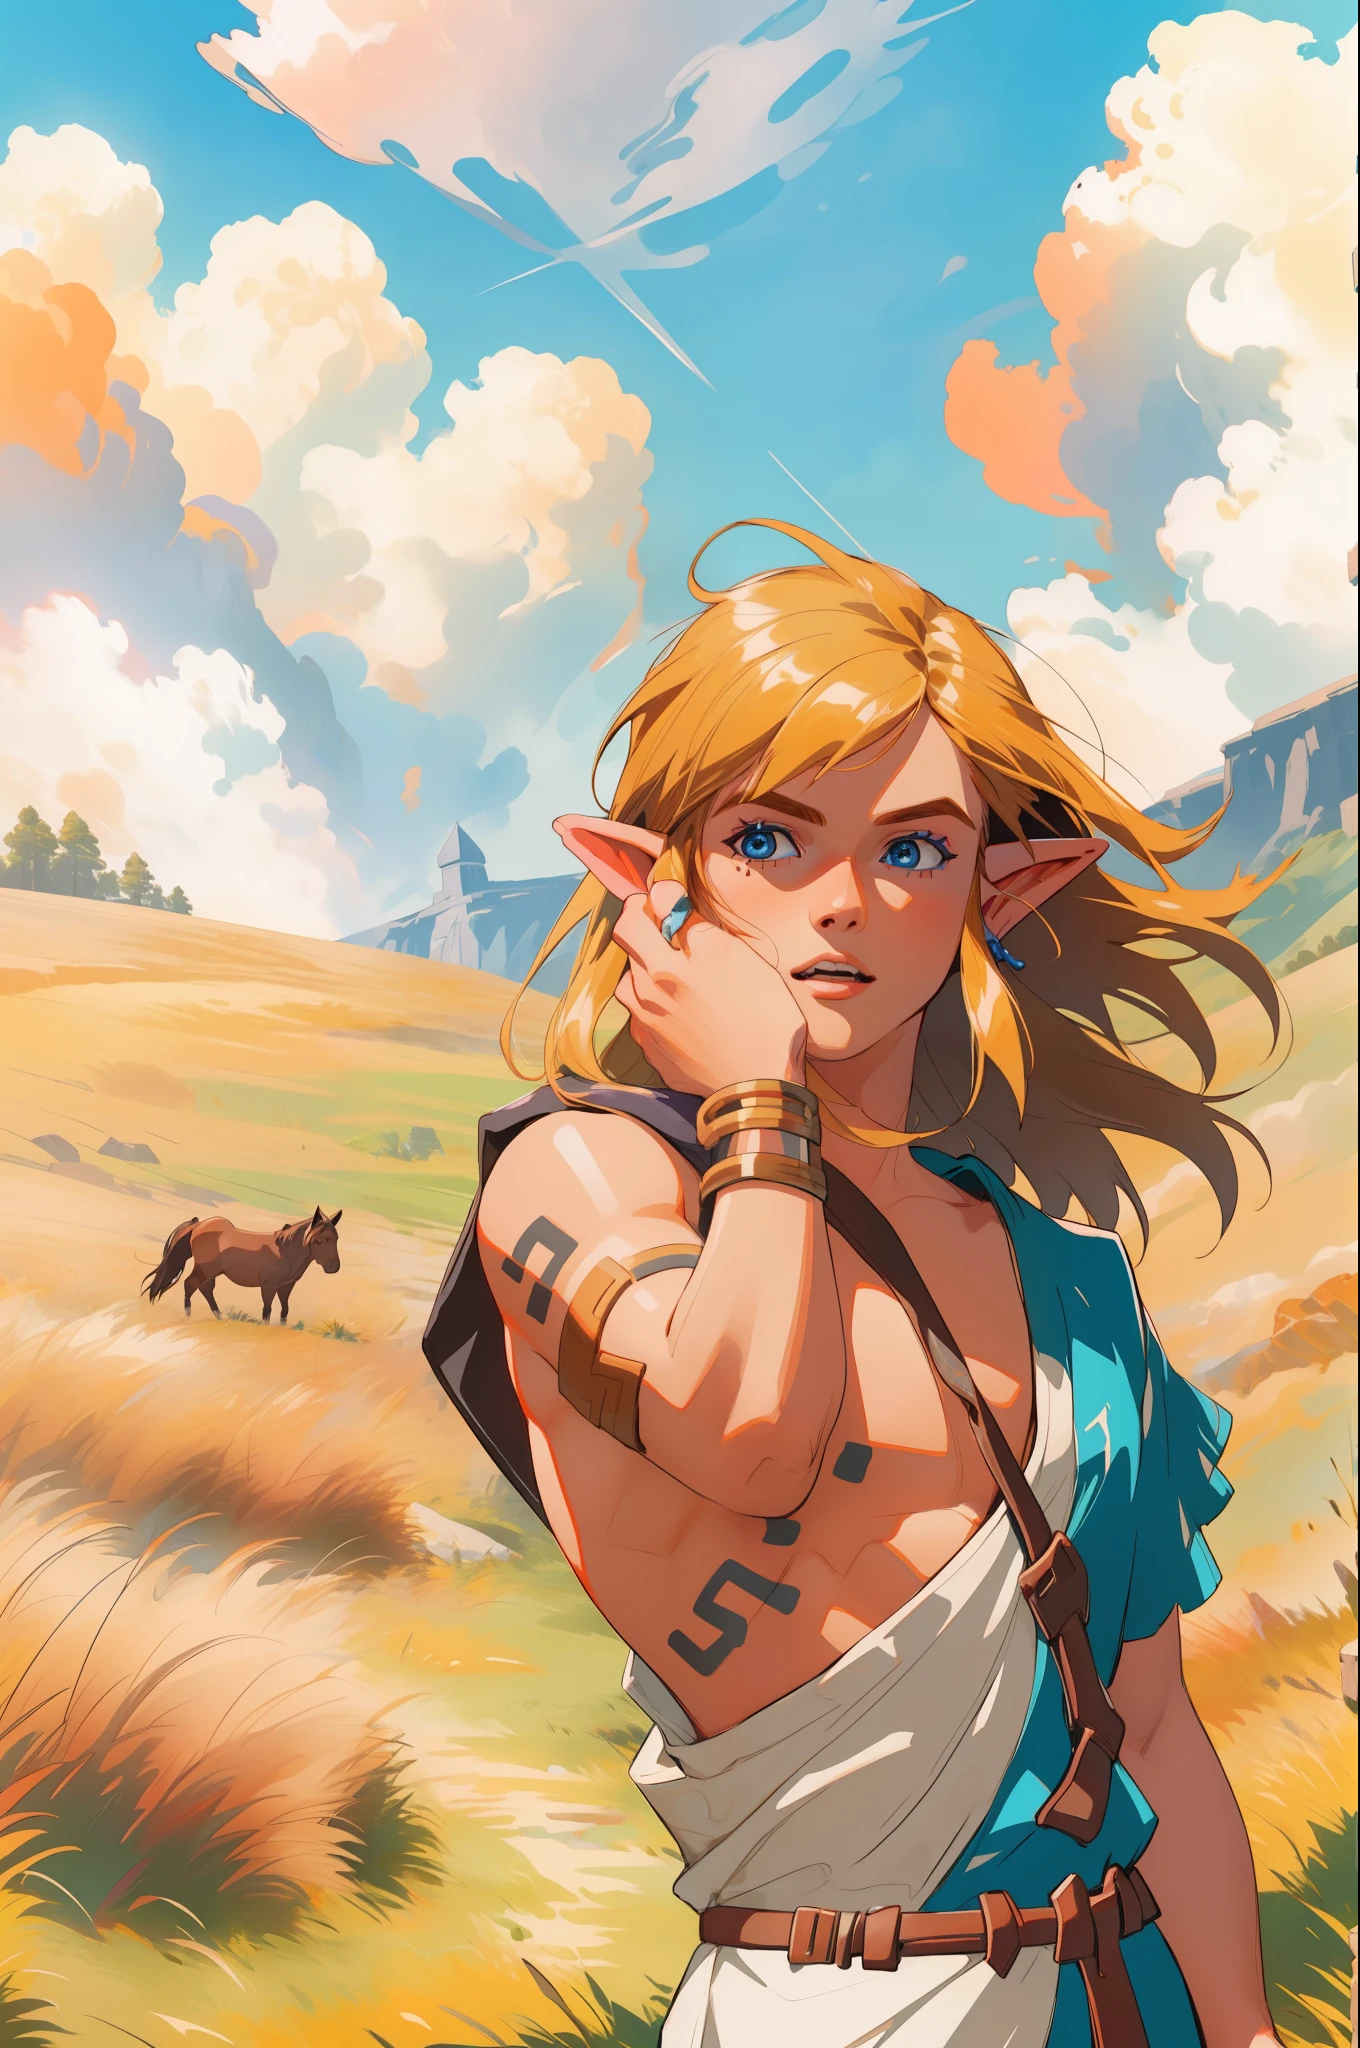 (Award Winning Digital Artwork:1.3) of (Ultra detailed:1.3) 1boy, leaning, seducing, blue eyes, blond hair, beautiful forest, shirtless,handsome, straps, gorgeous,CGSociety,ArtStation, forest, fantasy, breath of the wild, botw, extremely detailed face, gorgeous face, beautiful detailed eyes, clear eyes, beautiful hair. Hyrule kingdom, rolling hills, amazing background, beautiful fields, wild horses, hawks, deers, wild life, wide open fields, dancing grass, blue skies, lovely skies, big clouds, masterpiece, perfections, golden ratio, perfect design, rule of thirds,